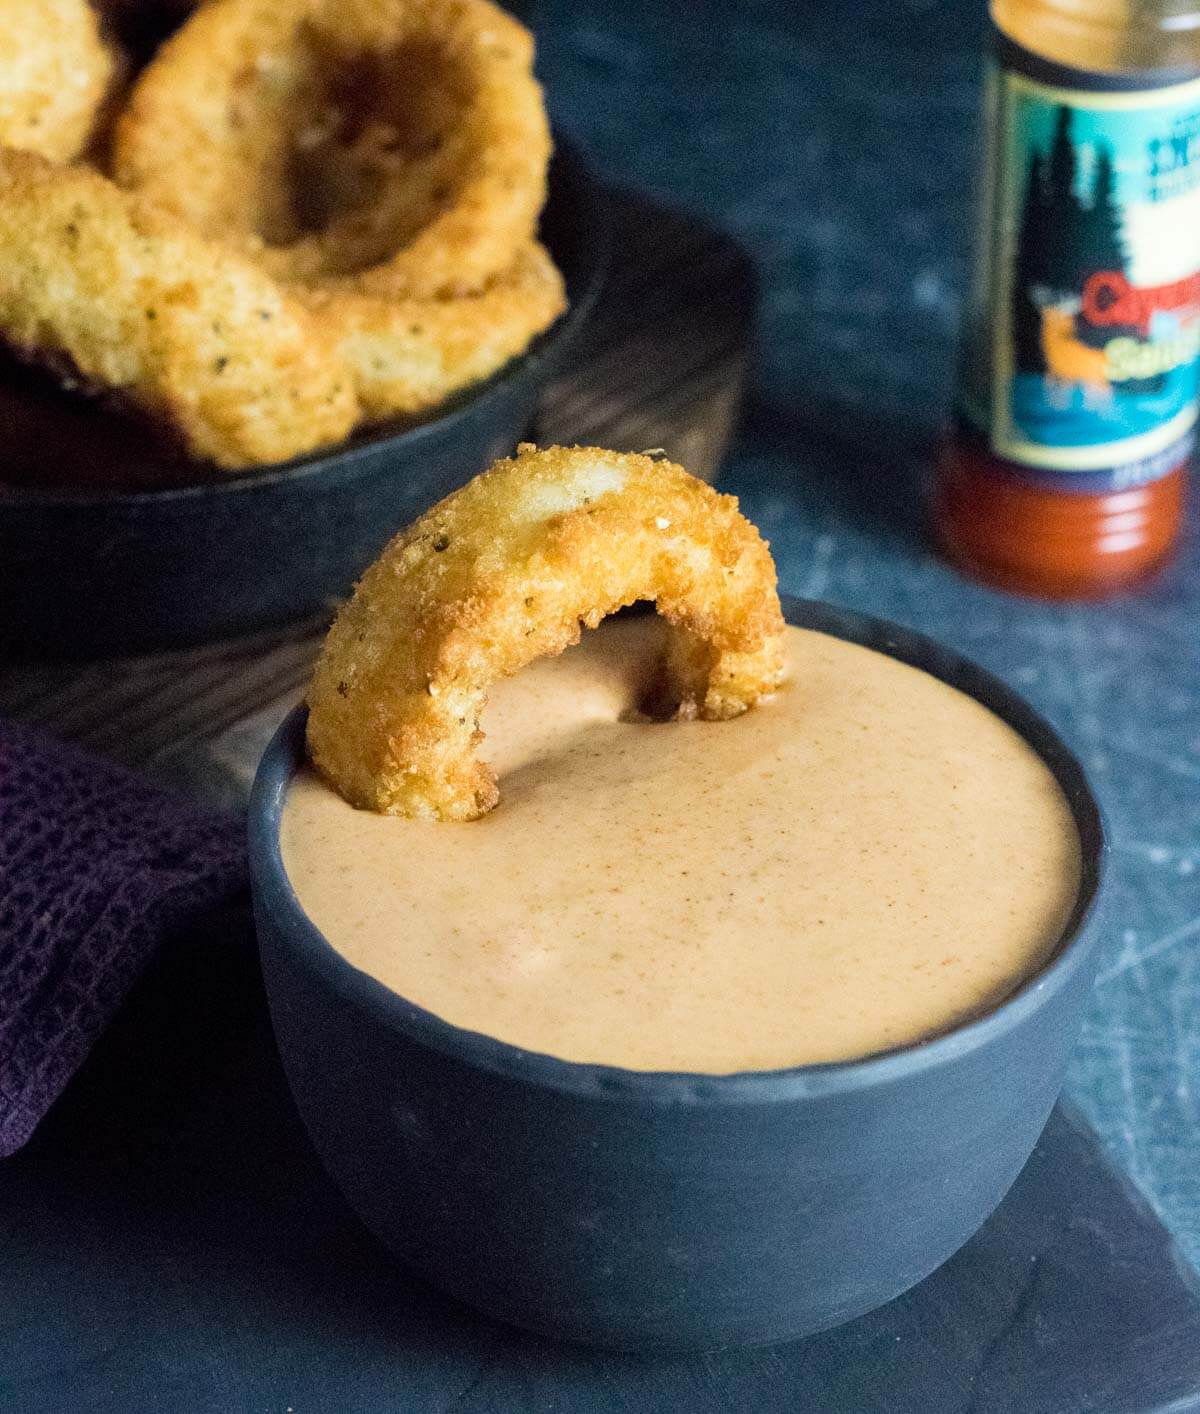 Dipping onion ring in spicy sauce.